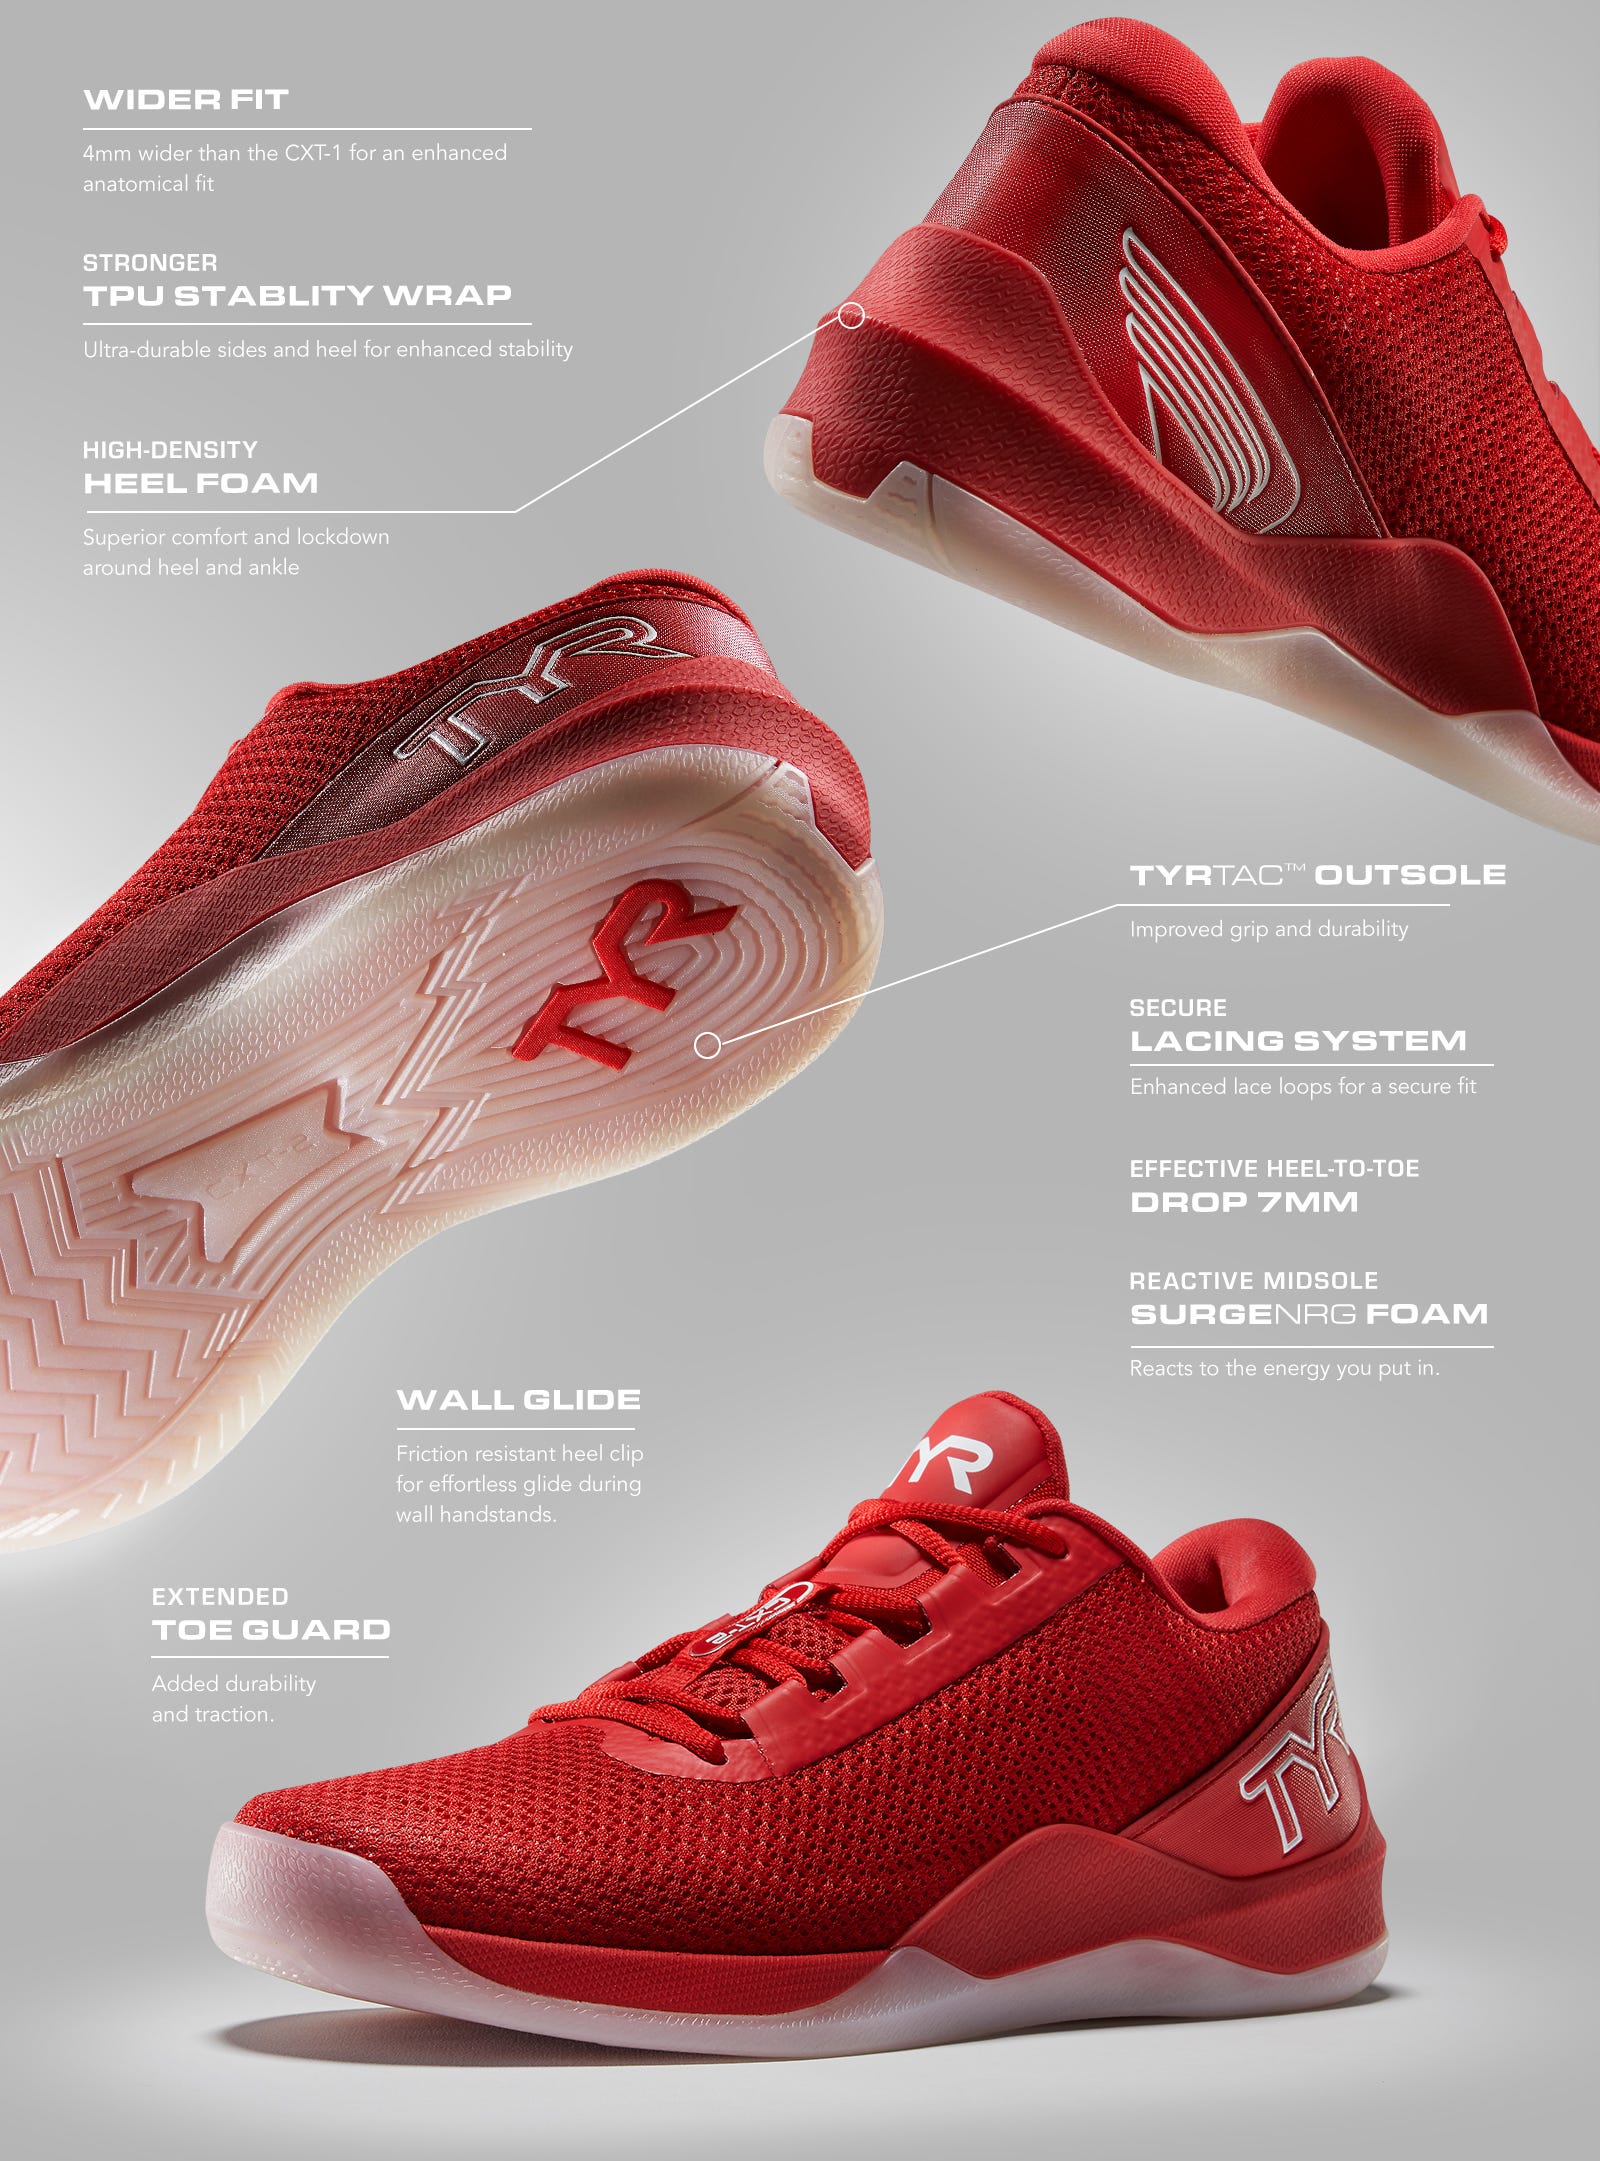 WIDER FIT: 4mm wider than the CXT-1 for an enhanced anatomical fit STRONGER TPU STABILITY WRAP: Ultra-durable sides and heel for enhanced stability HIGH-DENSITY HEEL FOAM: Superior comfort and lockdown around heel and ankle TYRTAC™ OUTSOLE: Improved grip 